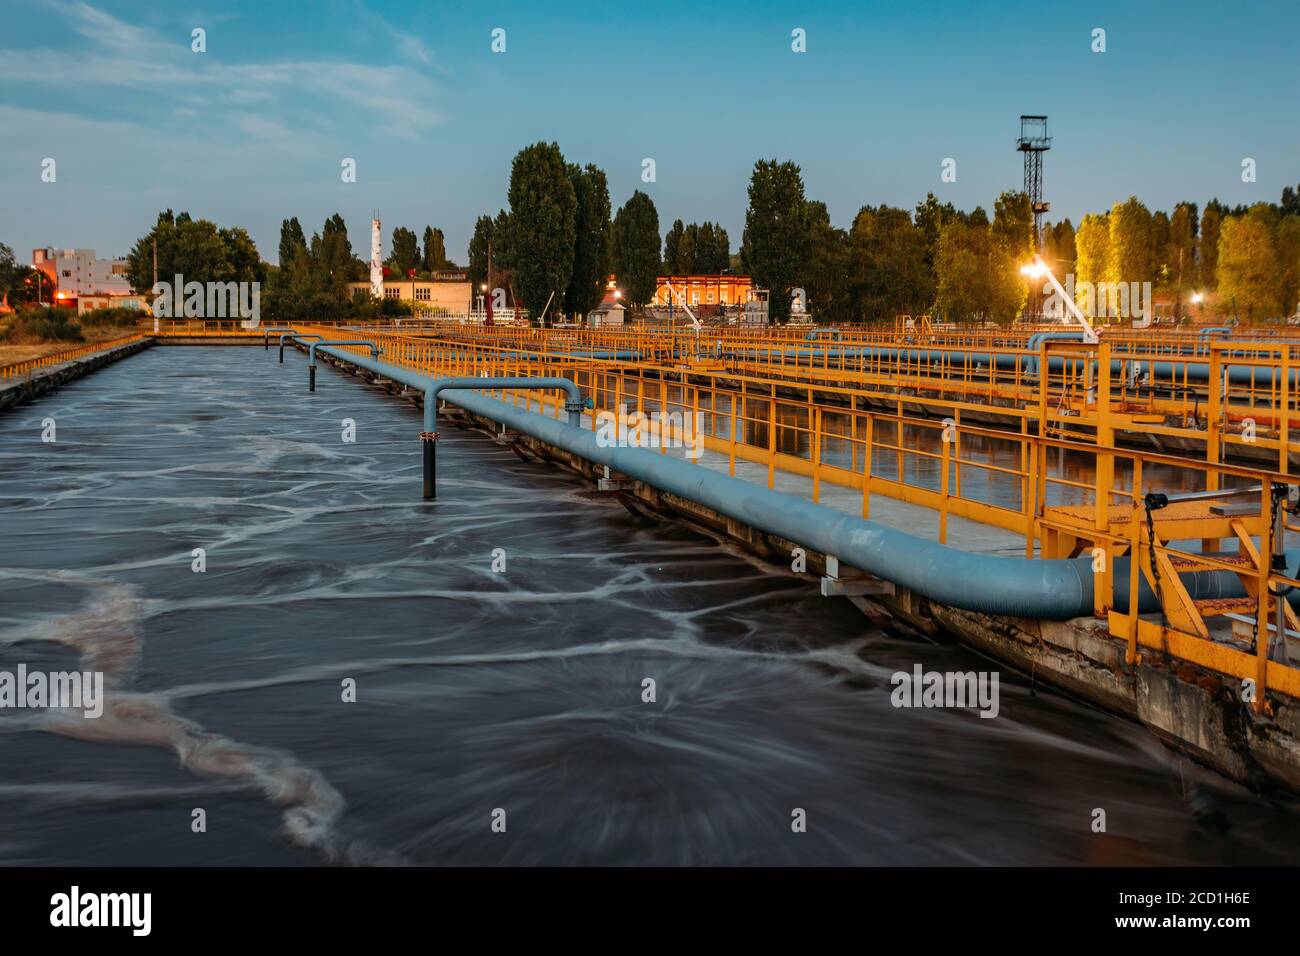 Modern wastewater treatment plant. Tanks for aeration and biological purification of sewage at night Stock Photo